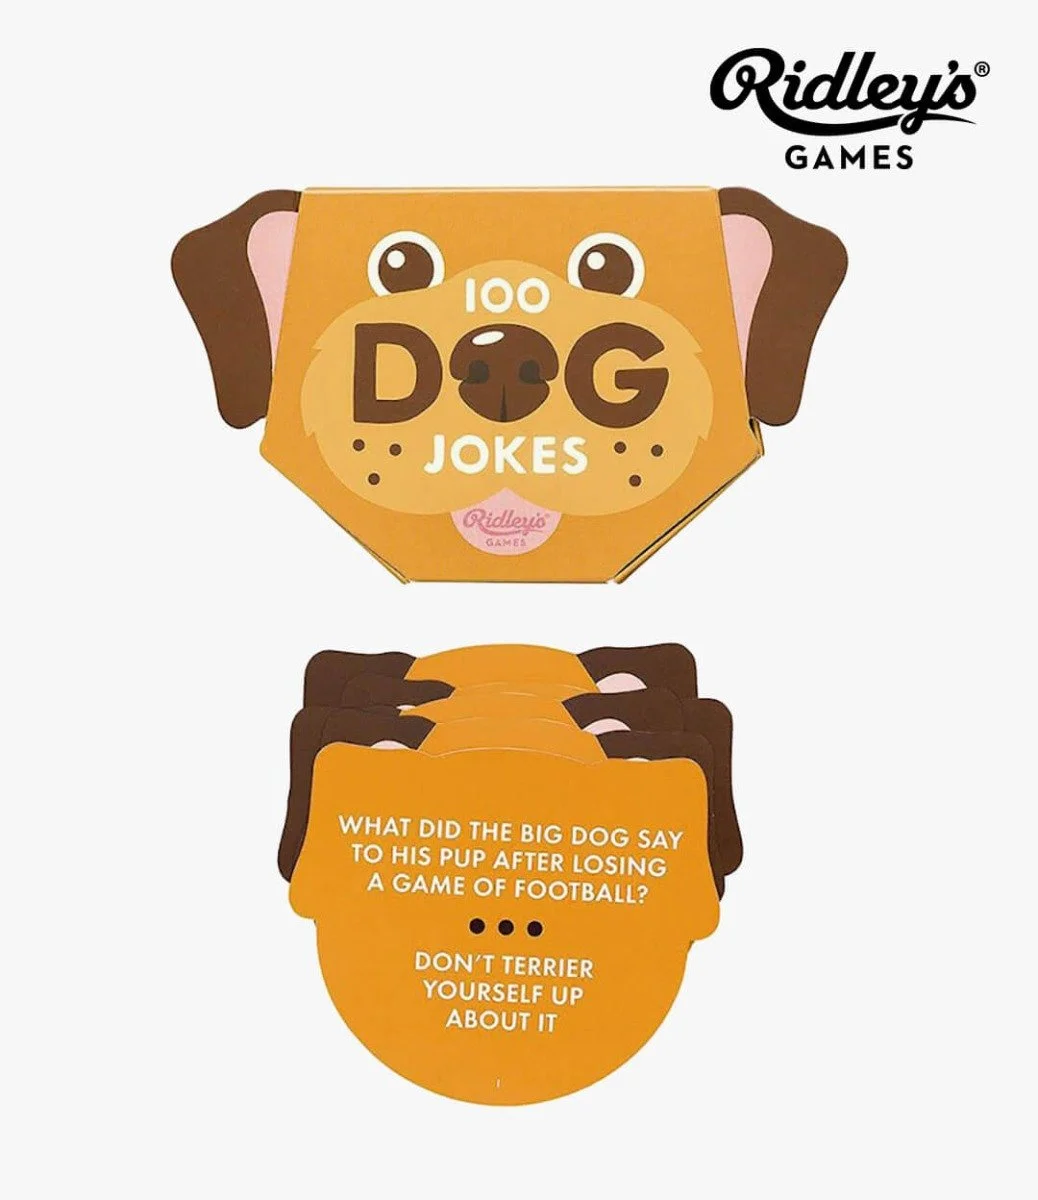 100 Dog Jokes by Ridley's